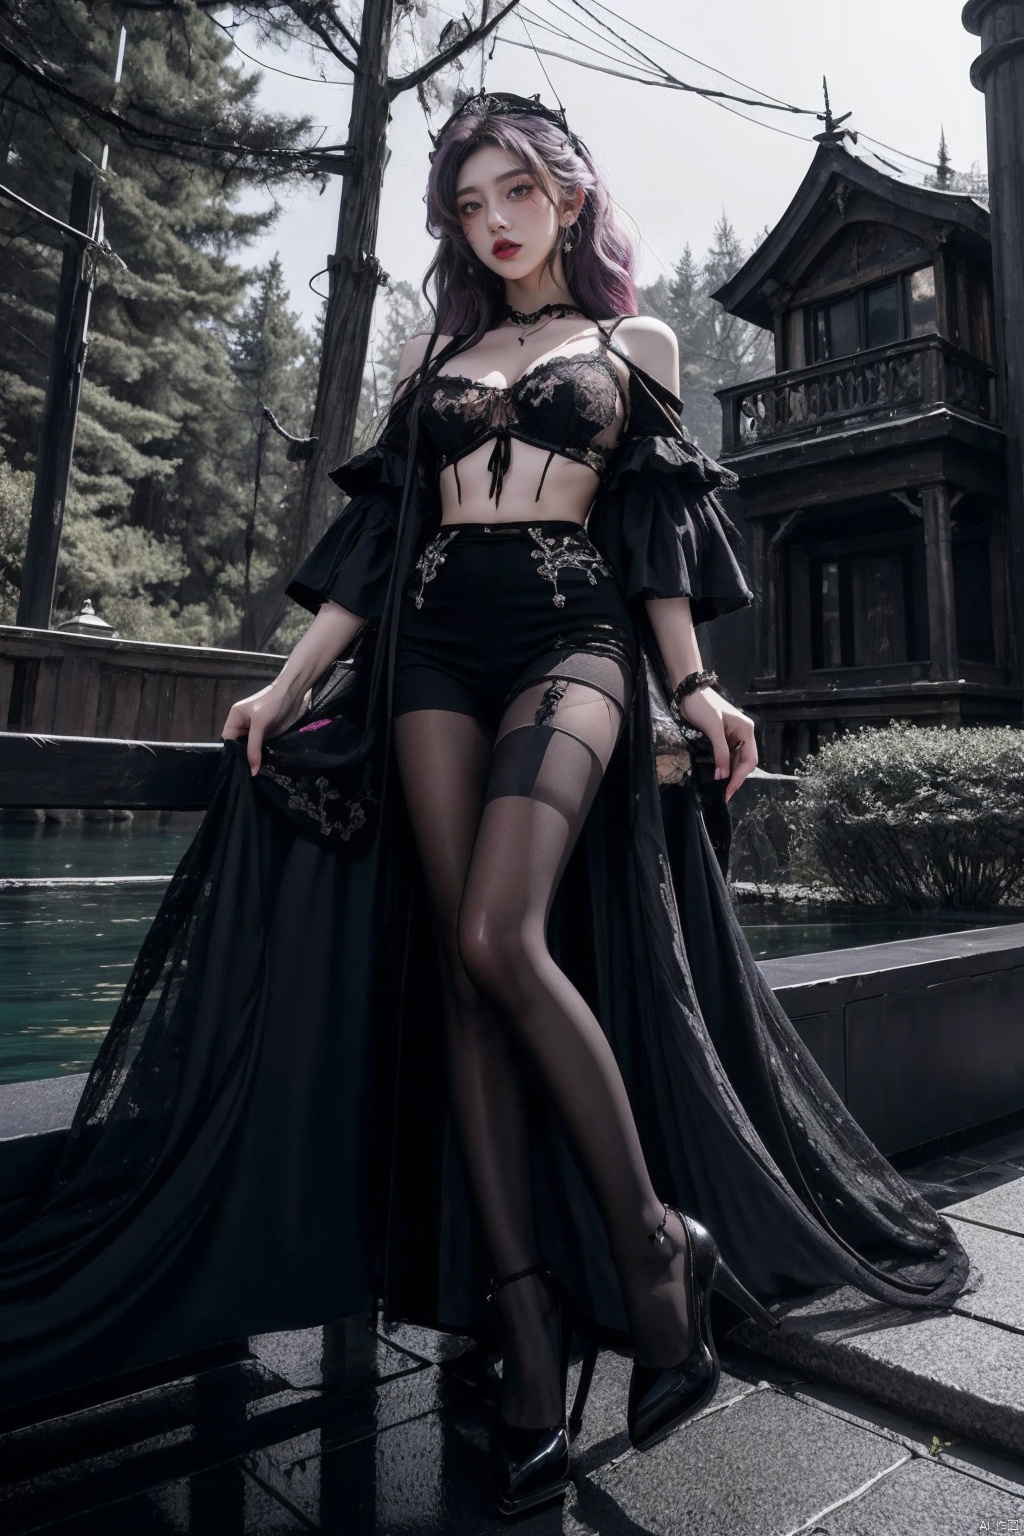  lightning storm, in the style of whimsical wilderness, 
purple, Floating hair, black gauze skirt, Gothic style, high contrast, film style portrait,
HUBG_Beauty_Girl, pantyhose, HUBG_Rococo_Style(loanword)